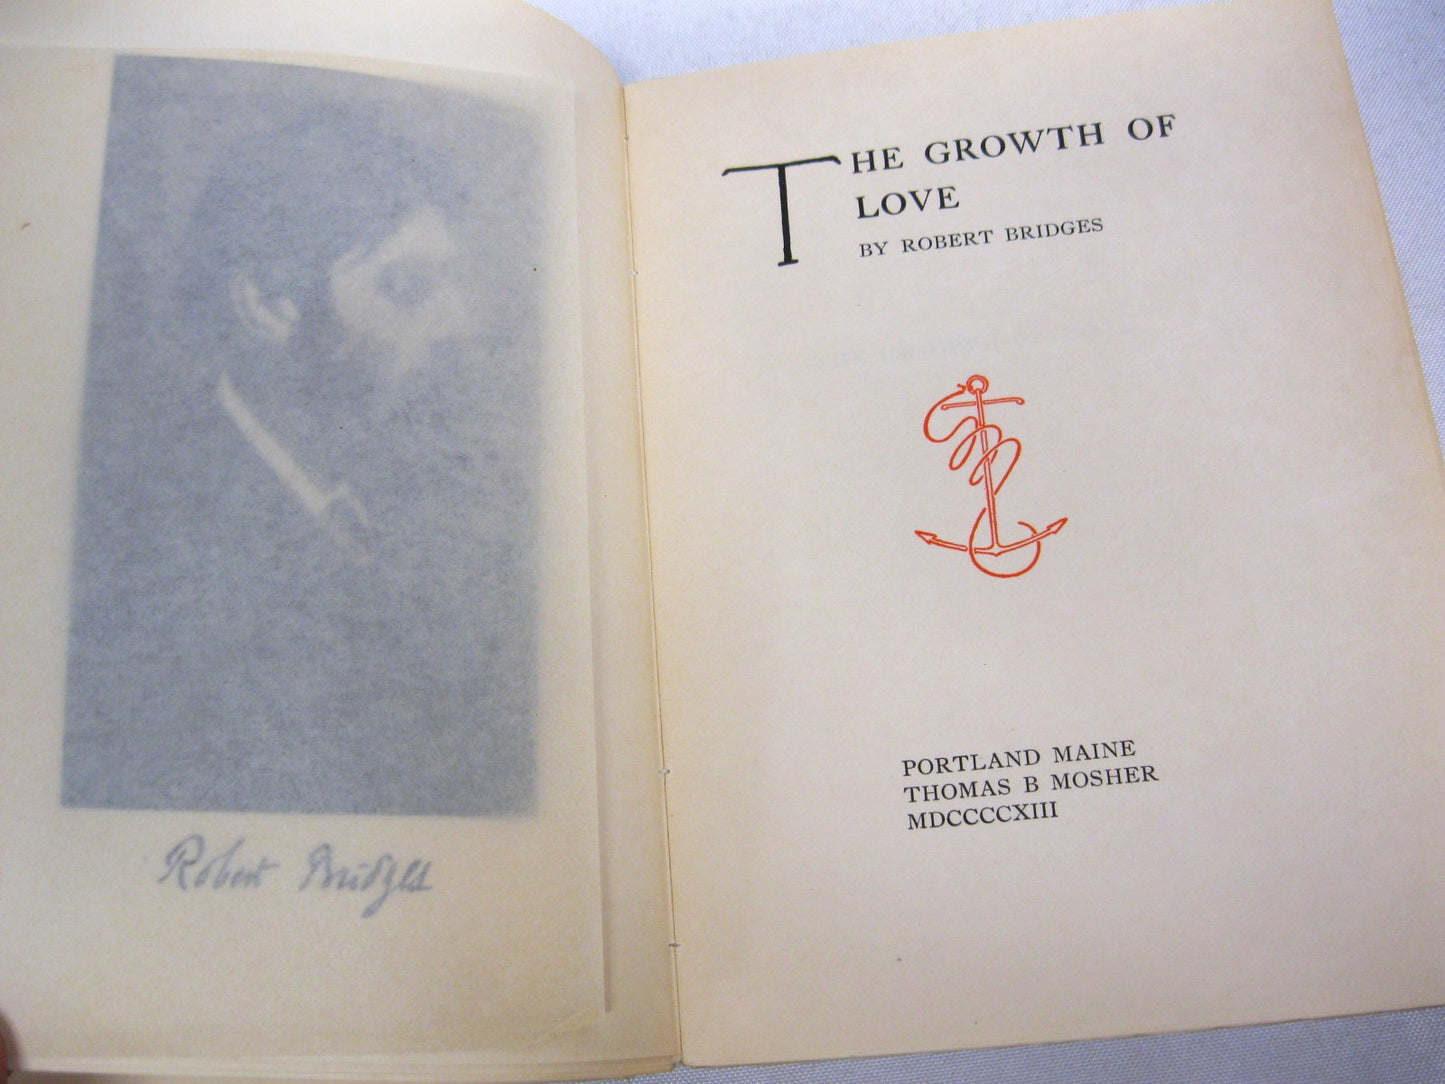 The Growth of Love by Robert Bridges